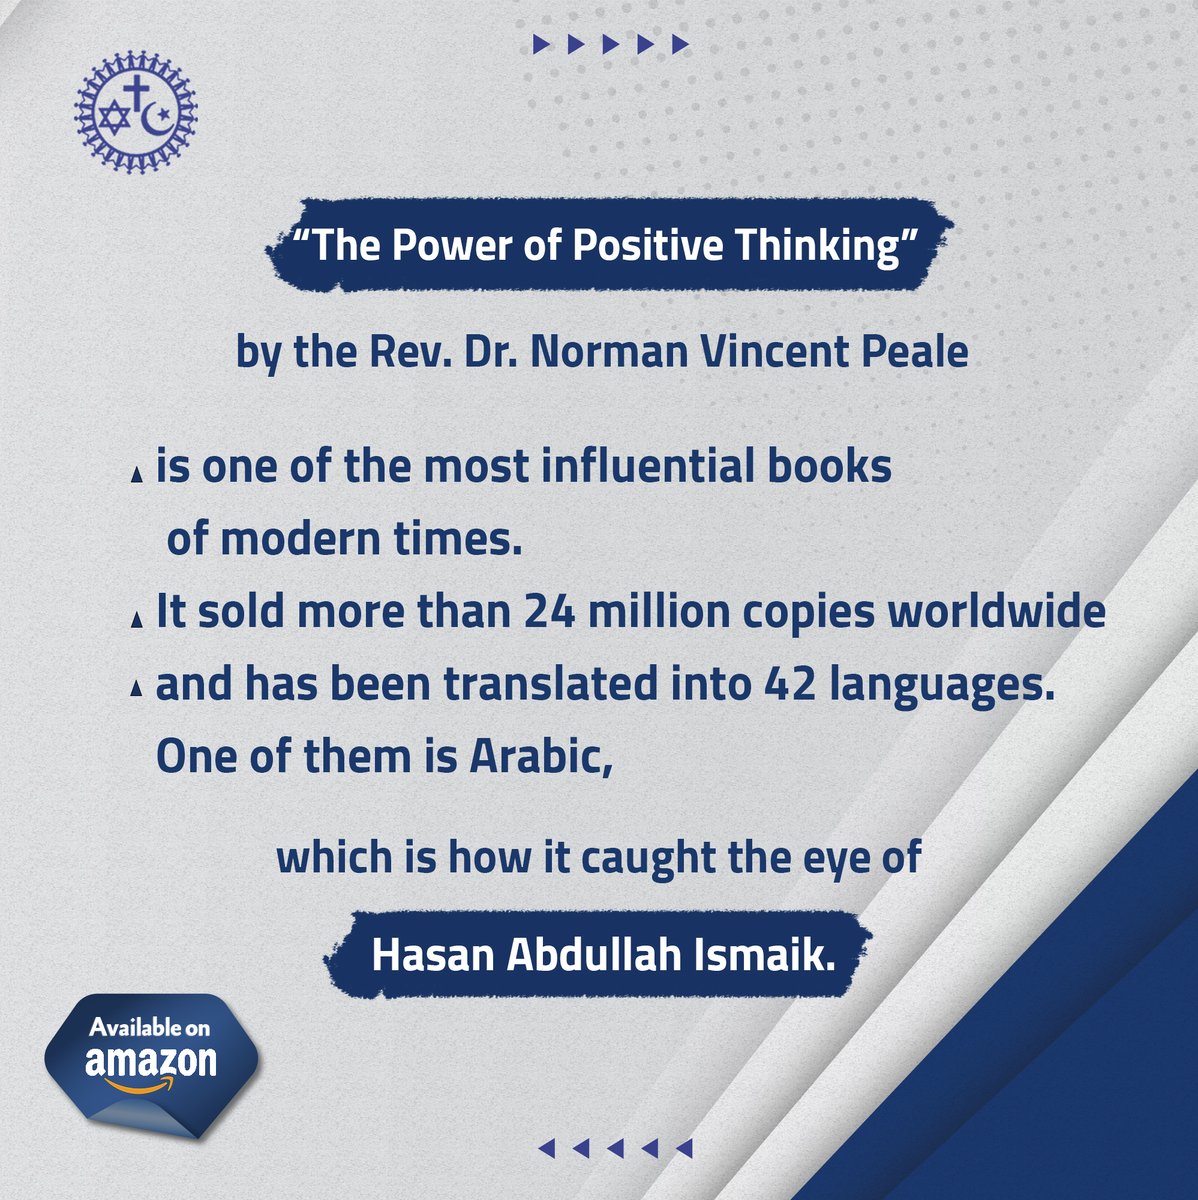 If you have a desire to share the positive impact of a book with others, consider 'The Power of Positive Thinking' new edition, available now on #Amazon 👉 : amzn.to/3ek46TI

#NormanVincentPeale - #HasanIsmaik - #Interfaith - #Christianity - #Judaism